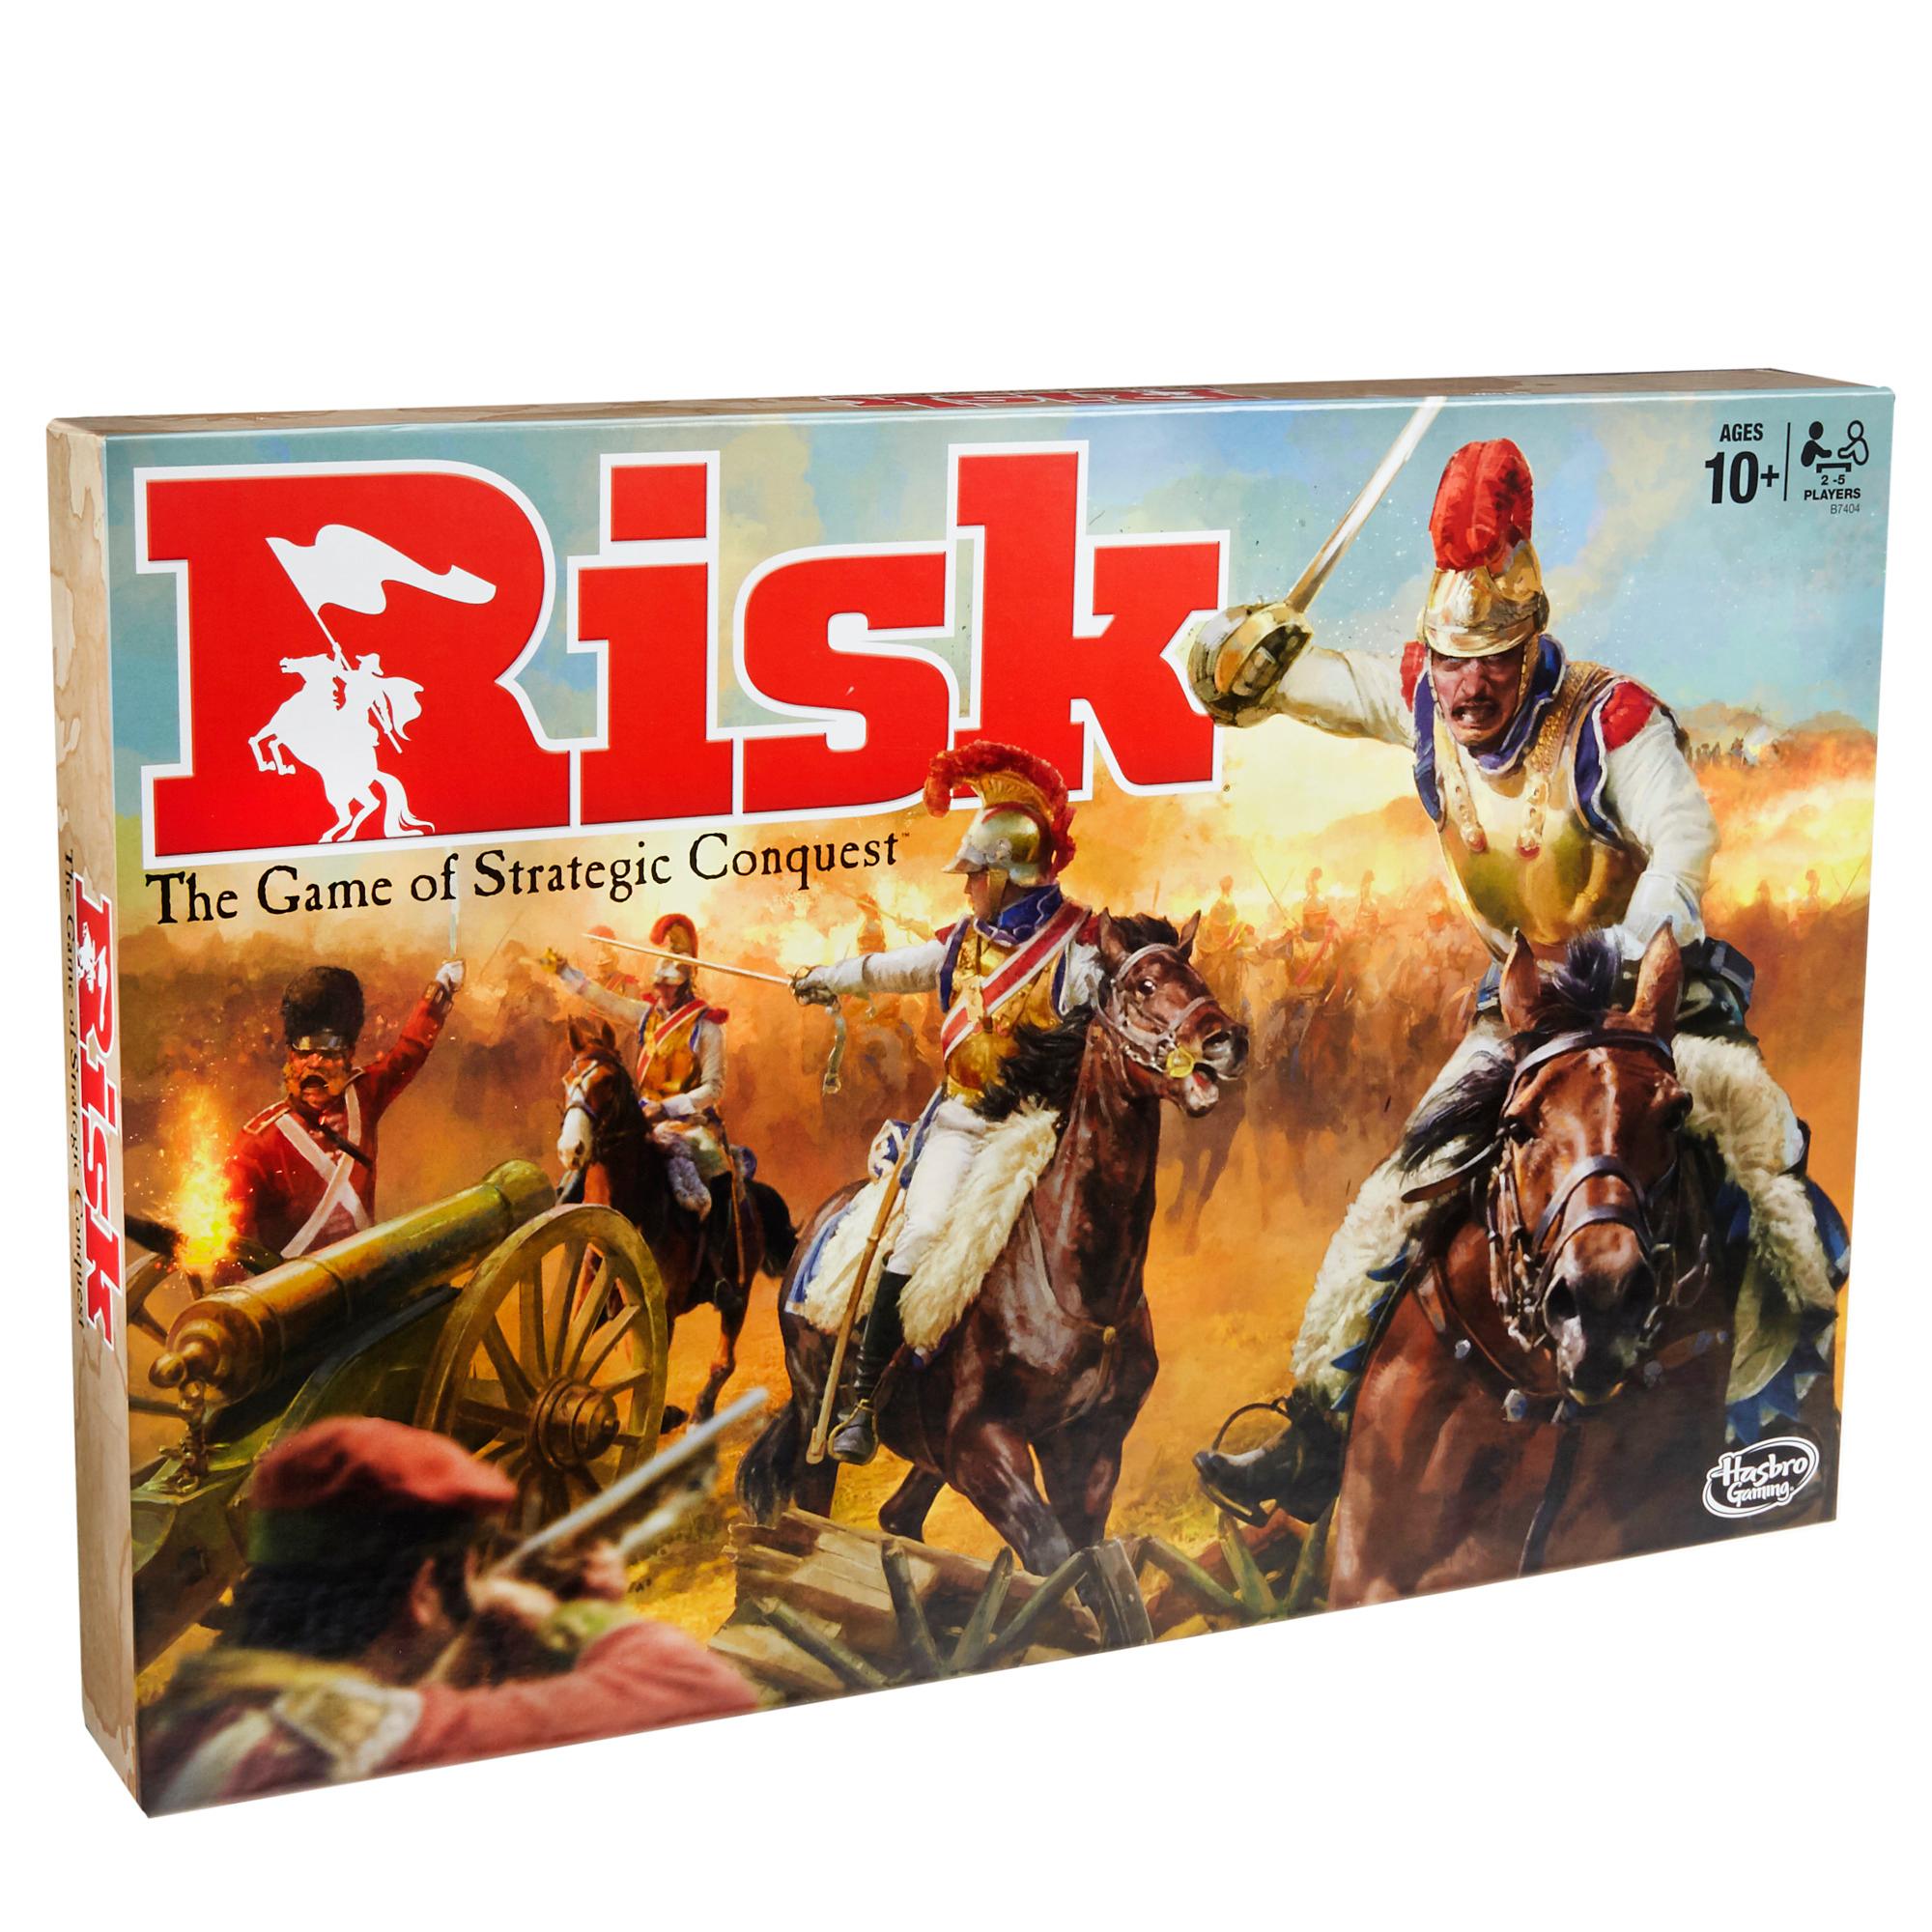 2015 Hasbro Risk The Game of Strategic Conquest B7404000 for sale online 